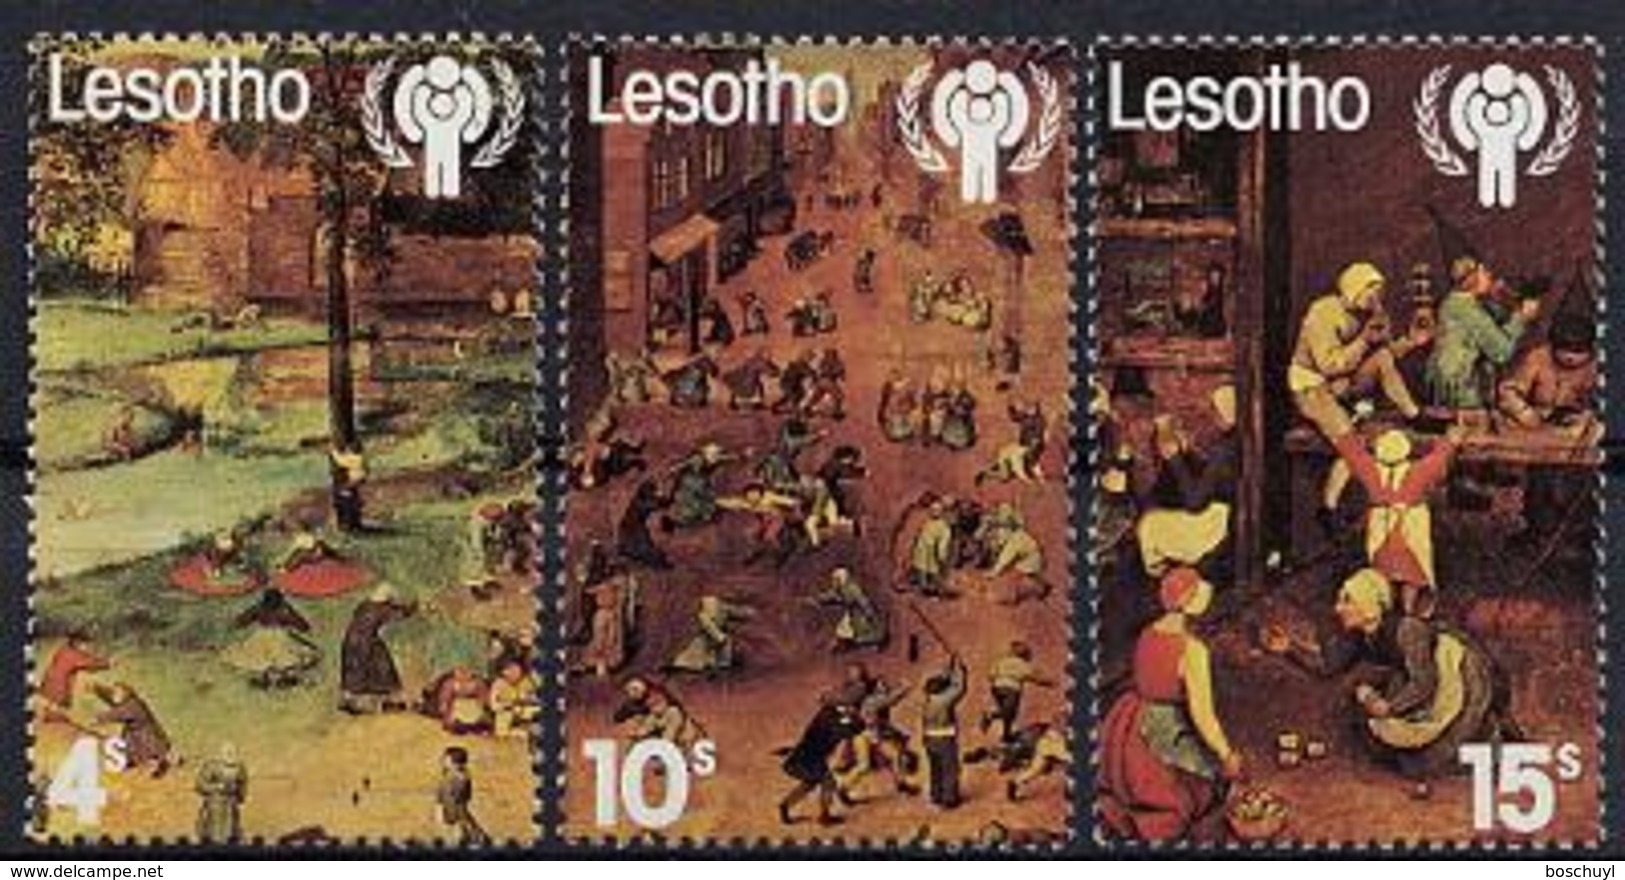 Lesotho, 1979, International Year Of The Child, IYC, United Nations, MNH, Michel 278-280 - Lesotho (1966-...)